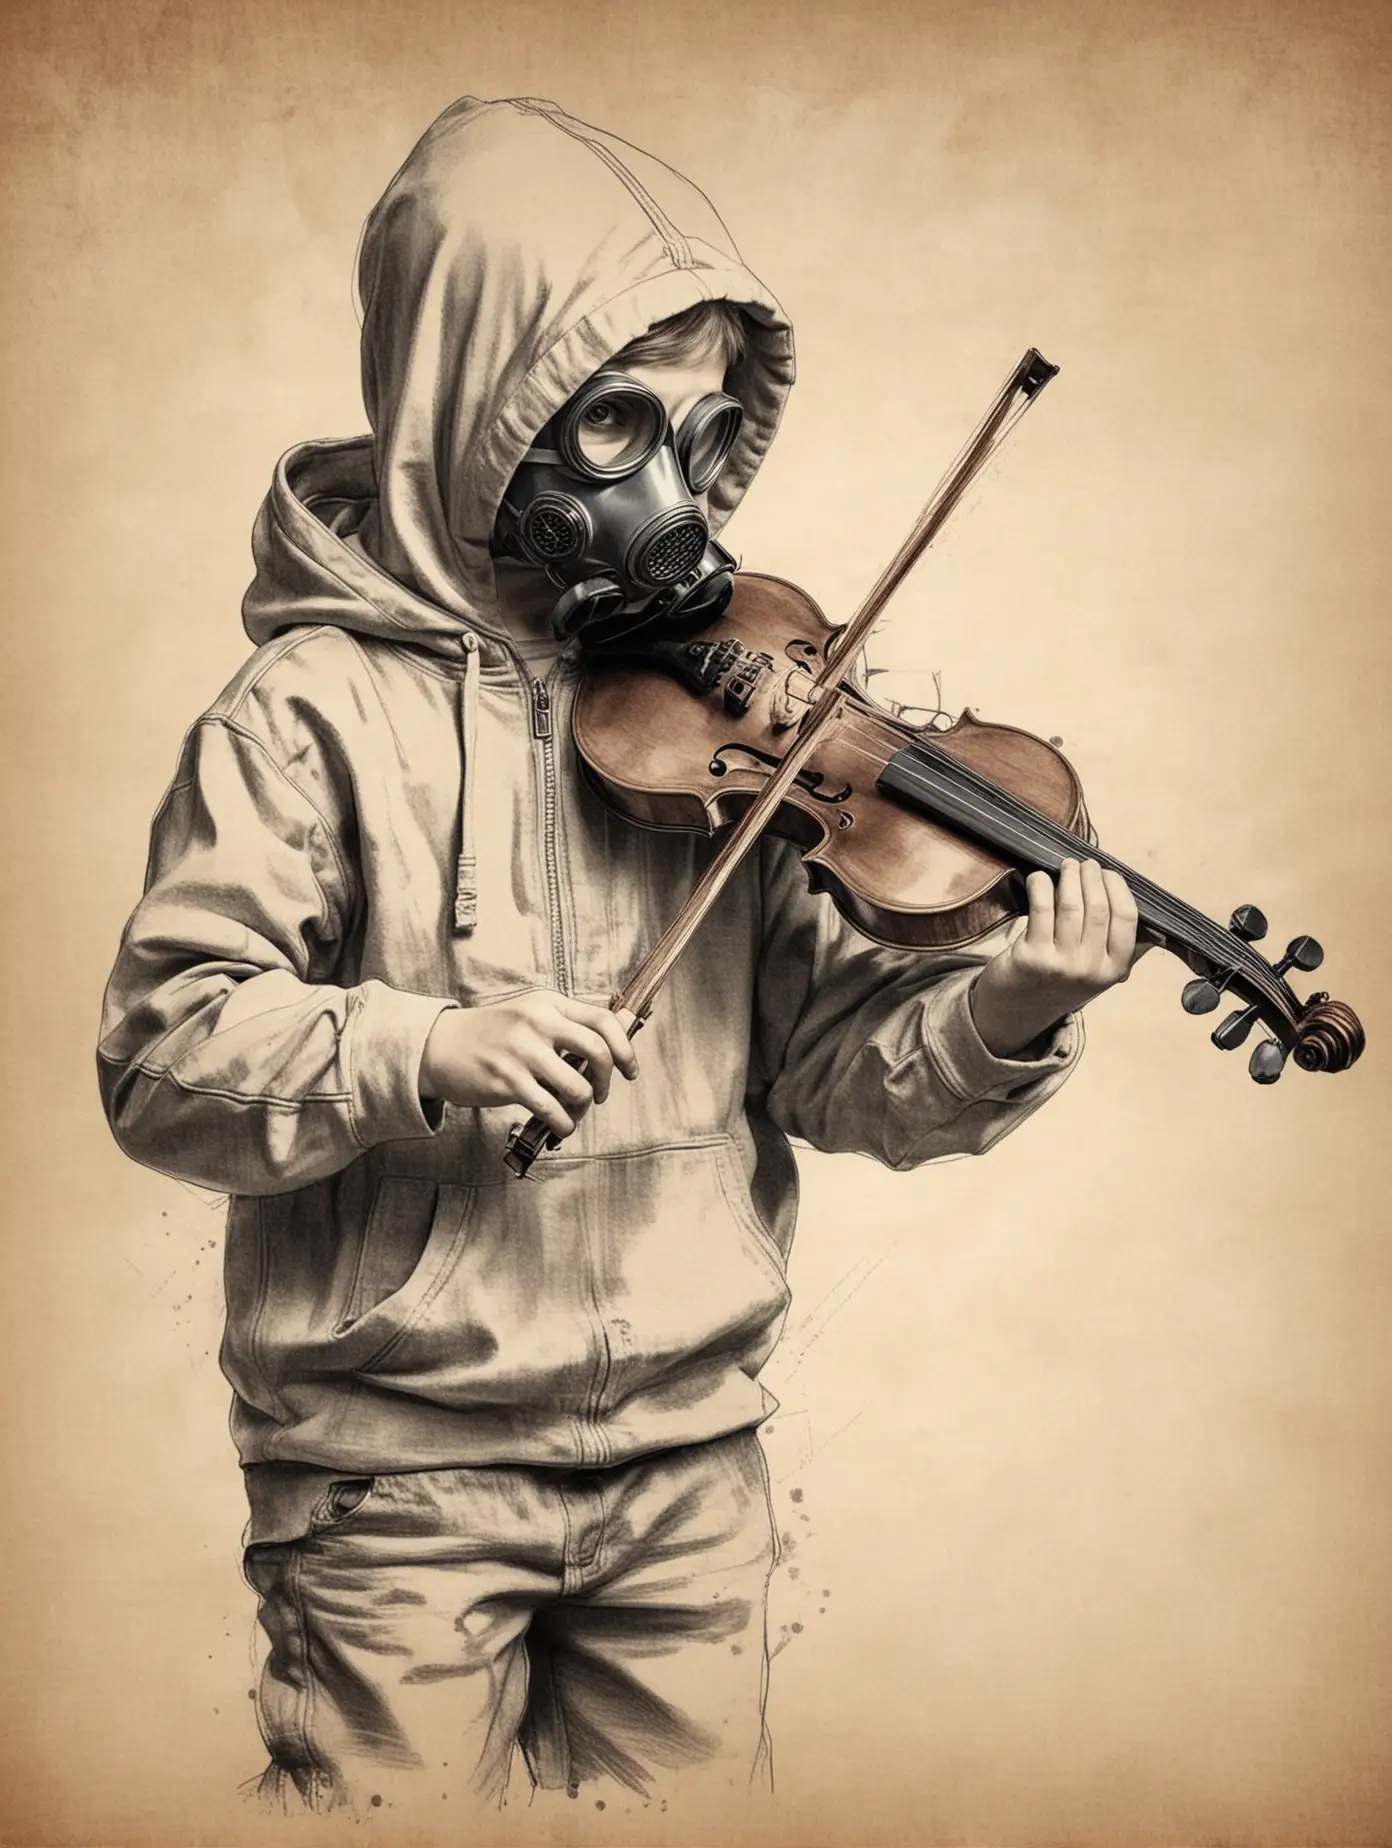 Young Musician in Gas Mask Playing Violin Sketch